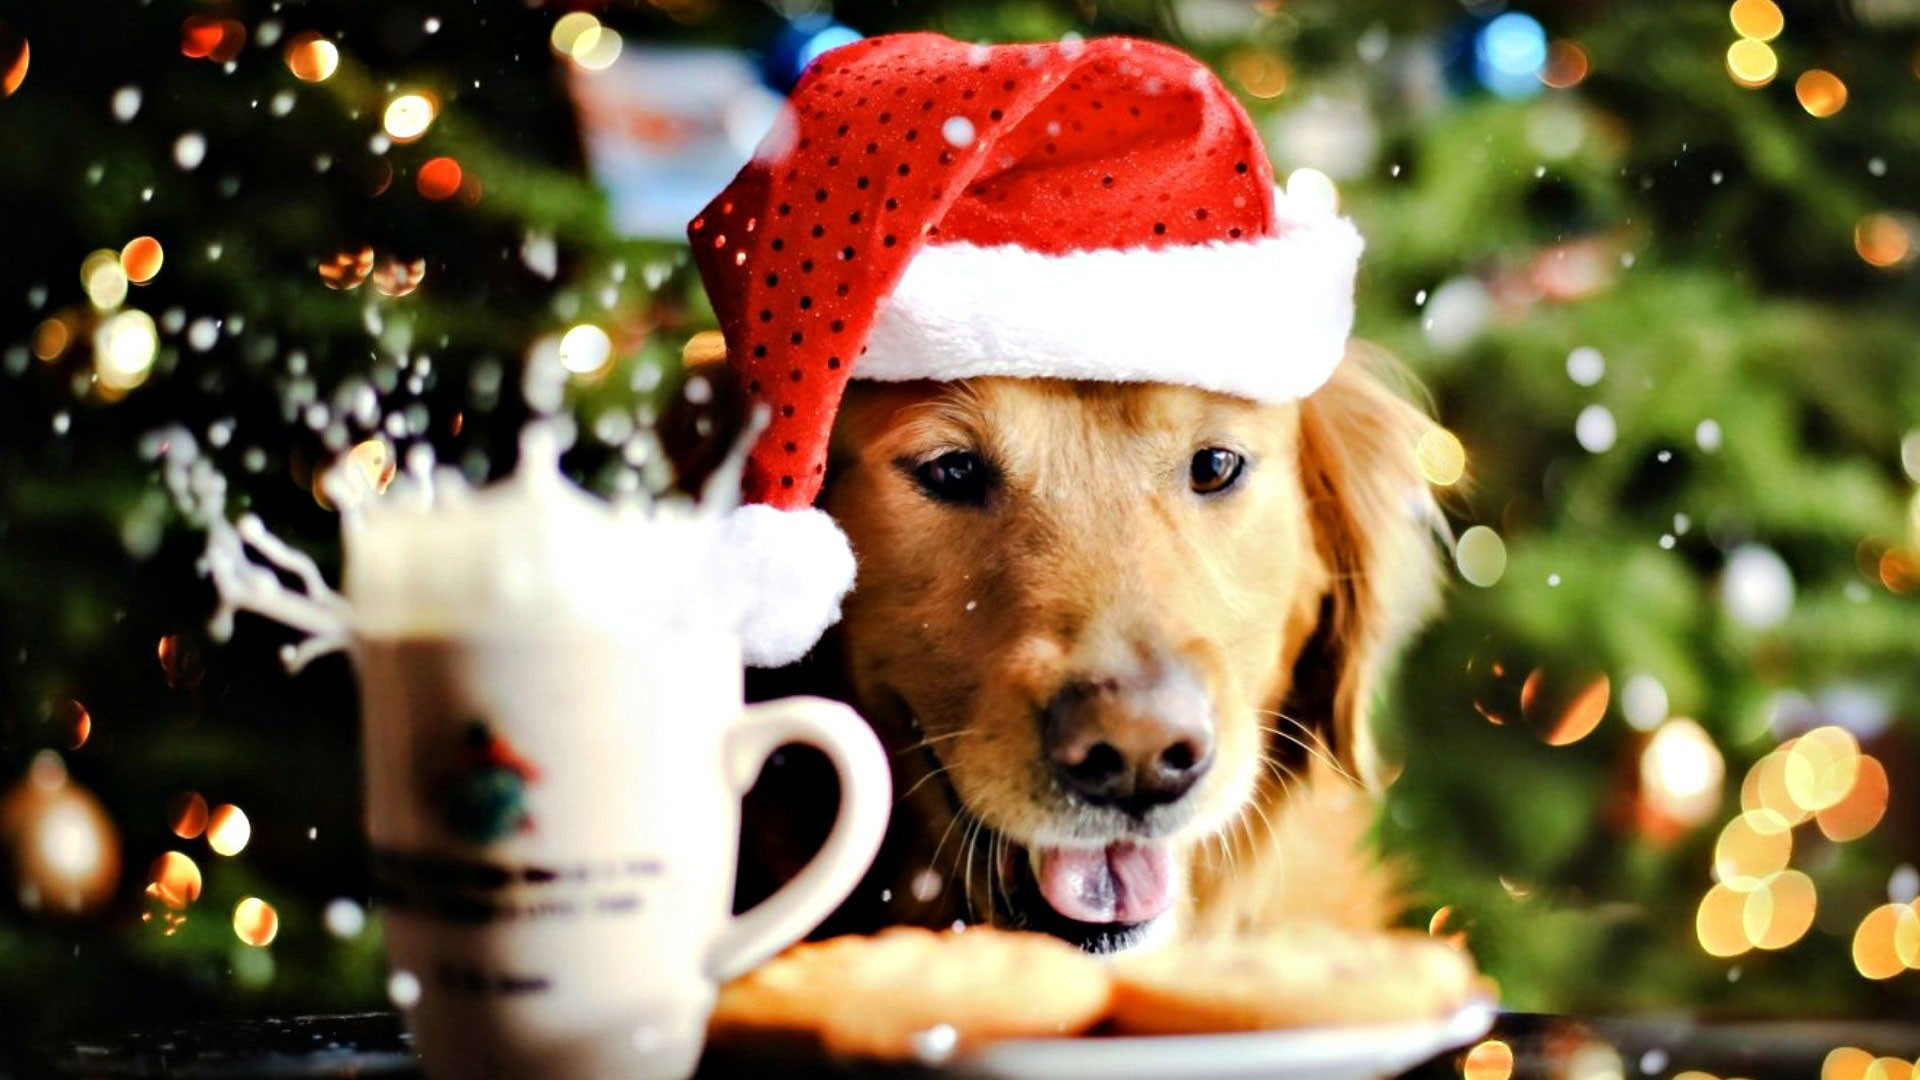 Puppy Christmas Wallpaper Image